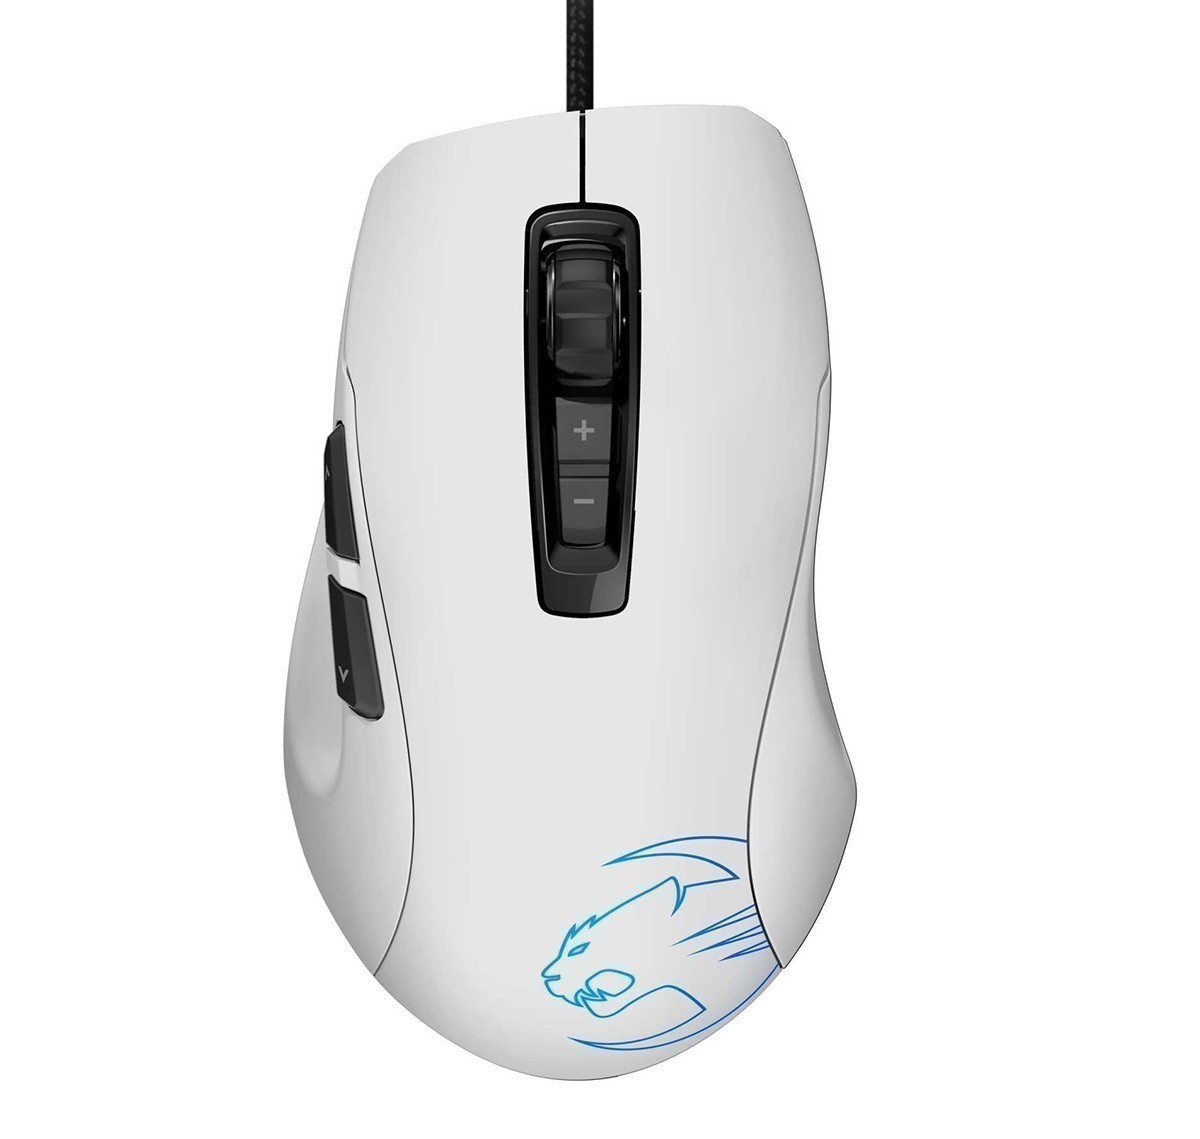 ROCCAT begins shipping its Kone Pure Color mouse in Phantom White